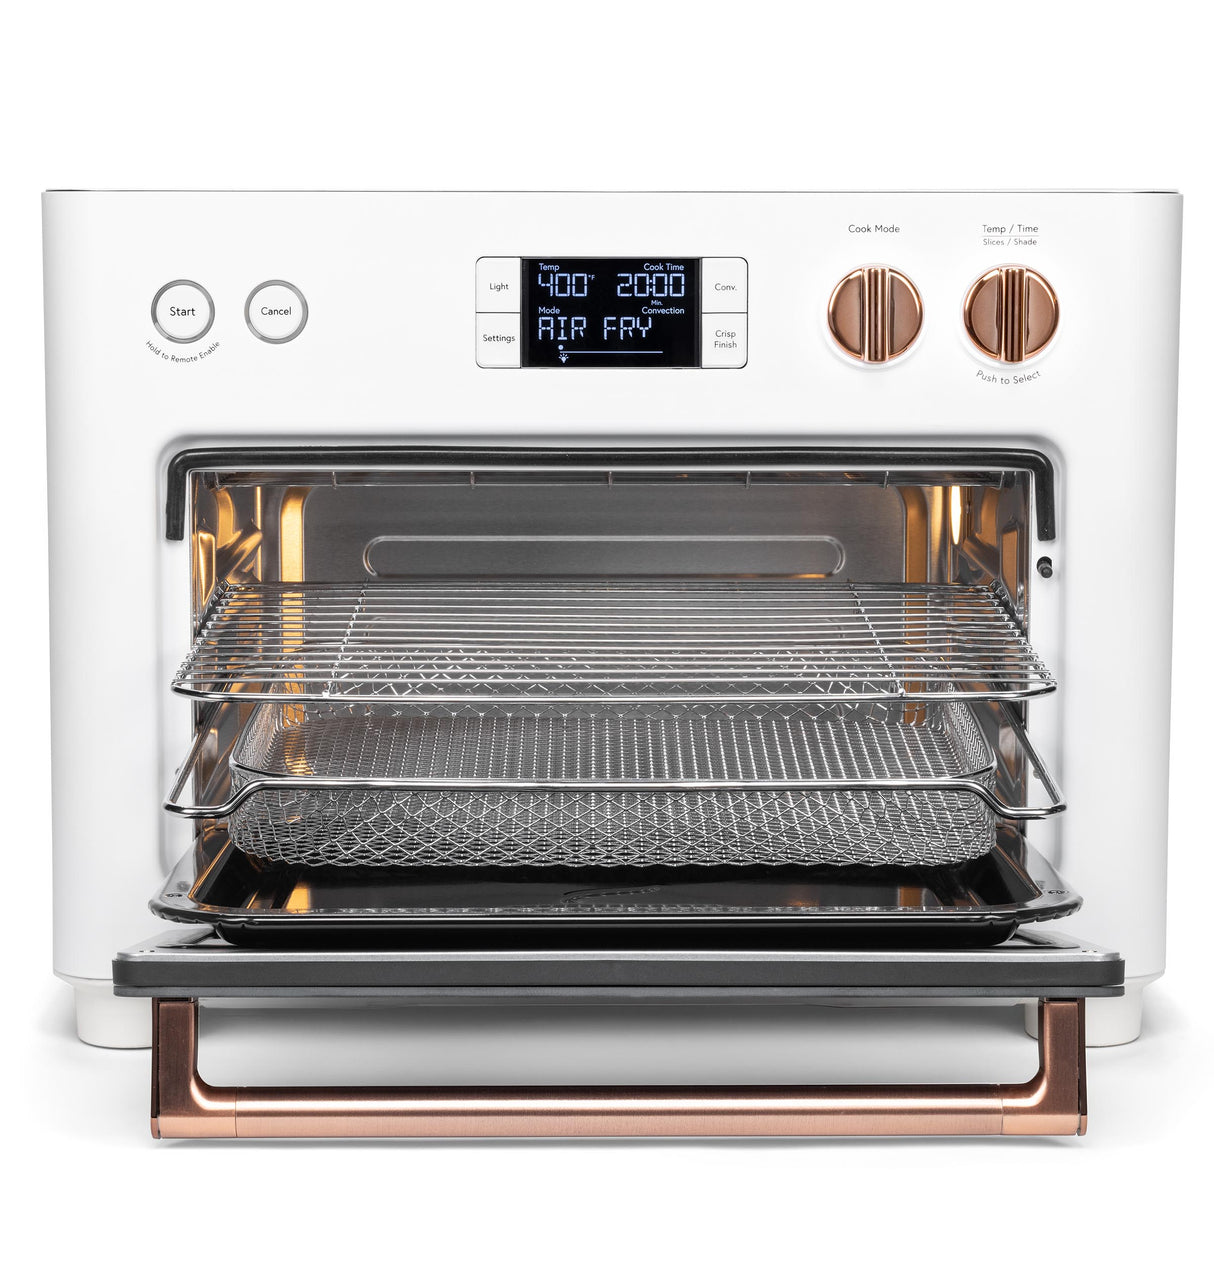 Caf(eback)(TM) Couture(TM) Oven with Air Fry - (C9OAAAS4RW3)